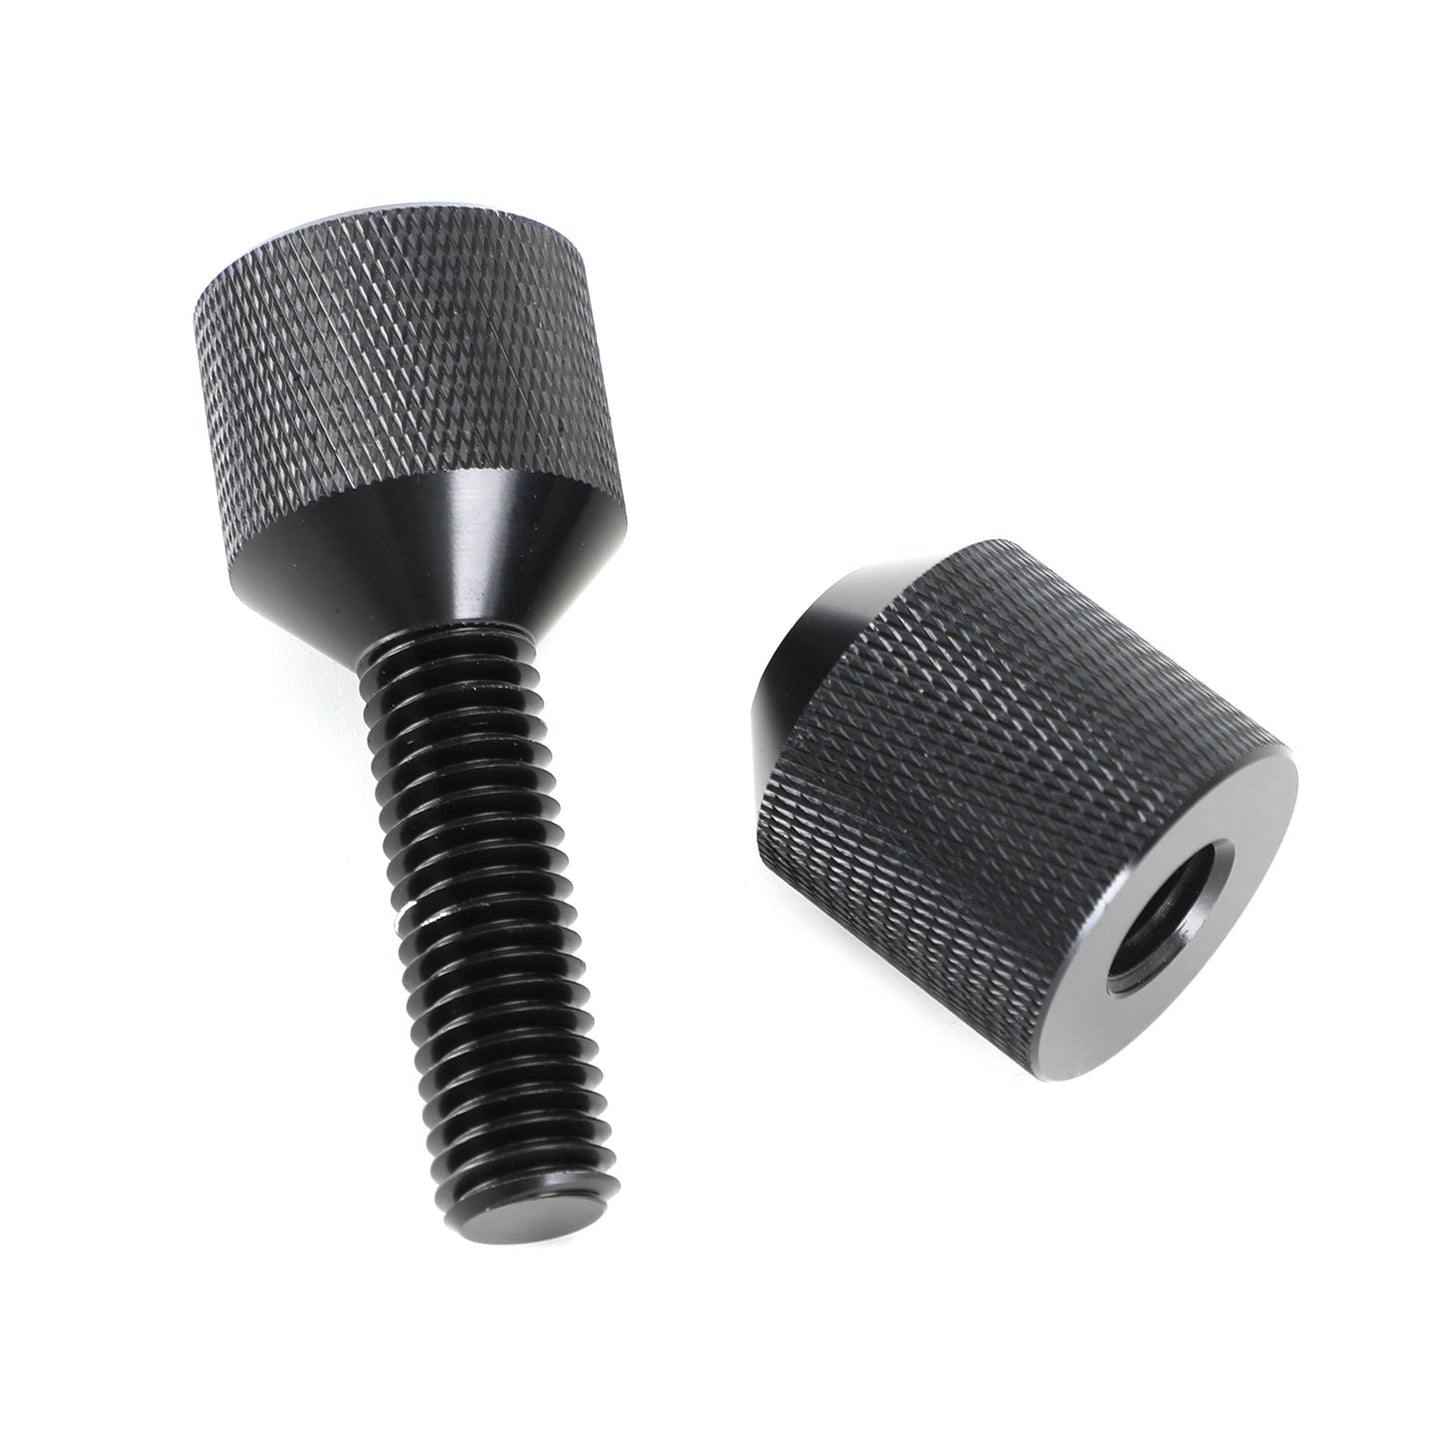 1-1/8" Two Hole Pins Small Aluminum Knurled With Removable Threads